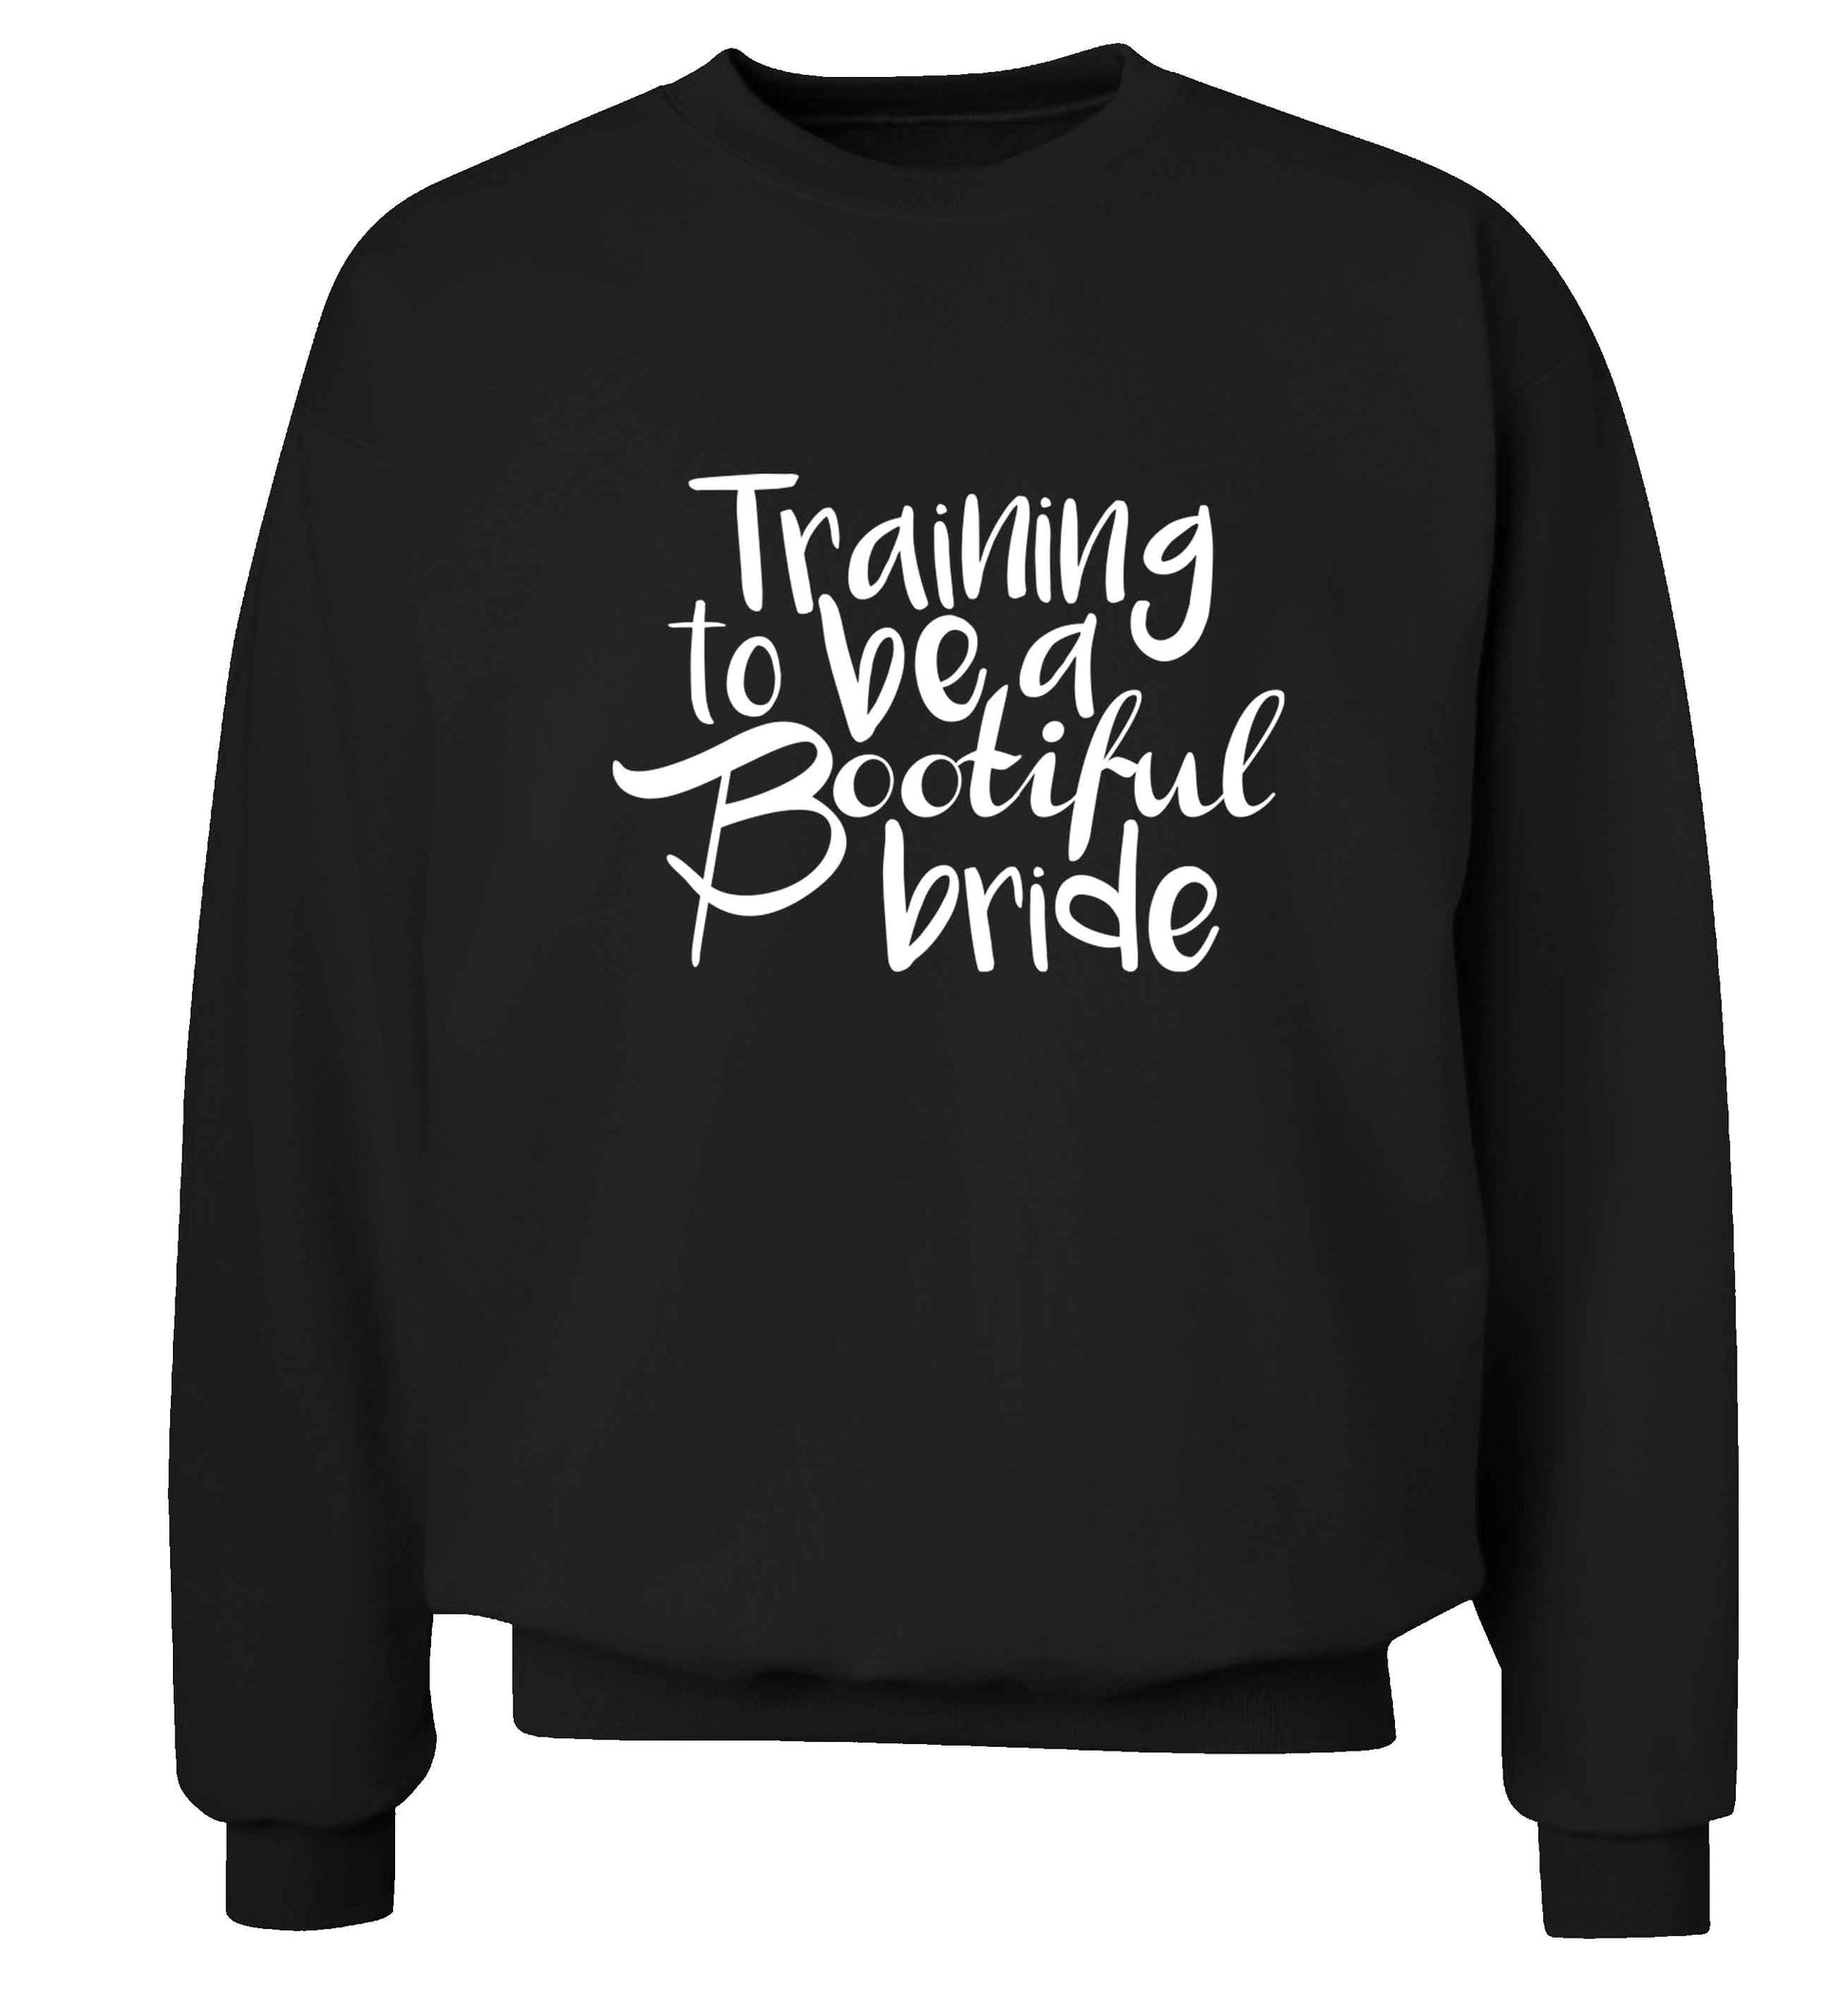 Get motivated and get fit for your big day! Our workout quotes and designs will get you ready to sweat! Perfect for any bride, groom or bridesmaid to be!  adult's unisex black sweater 2XL